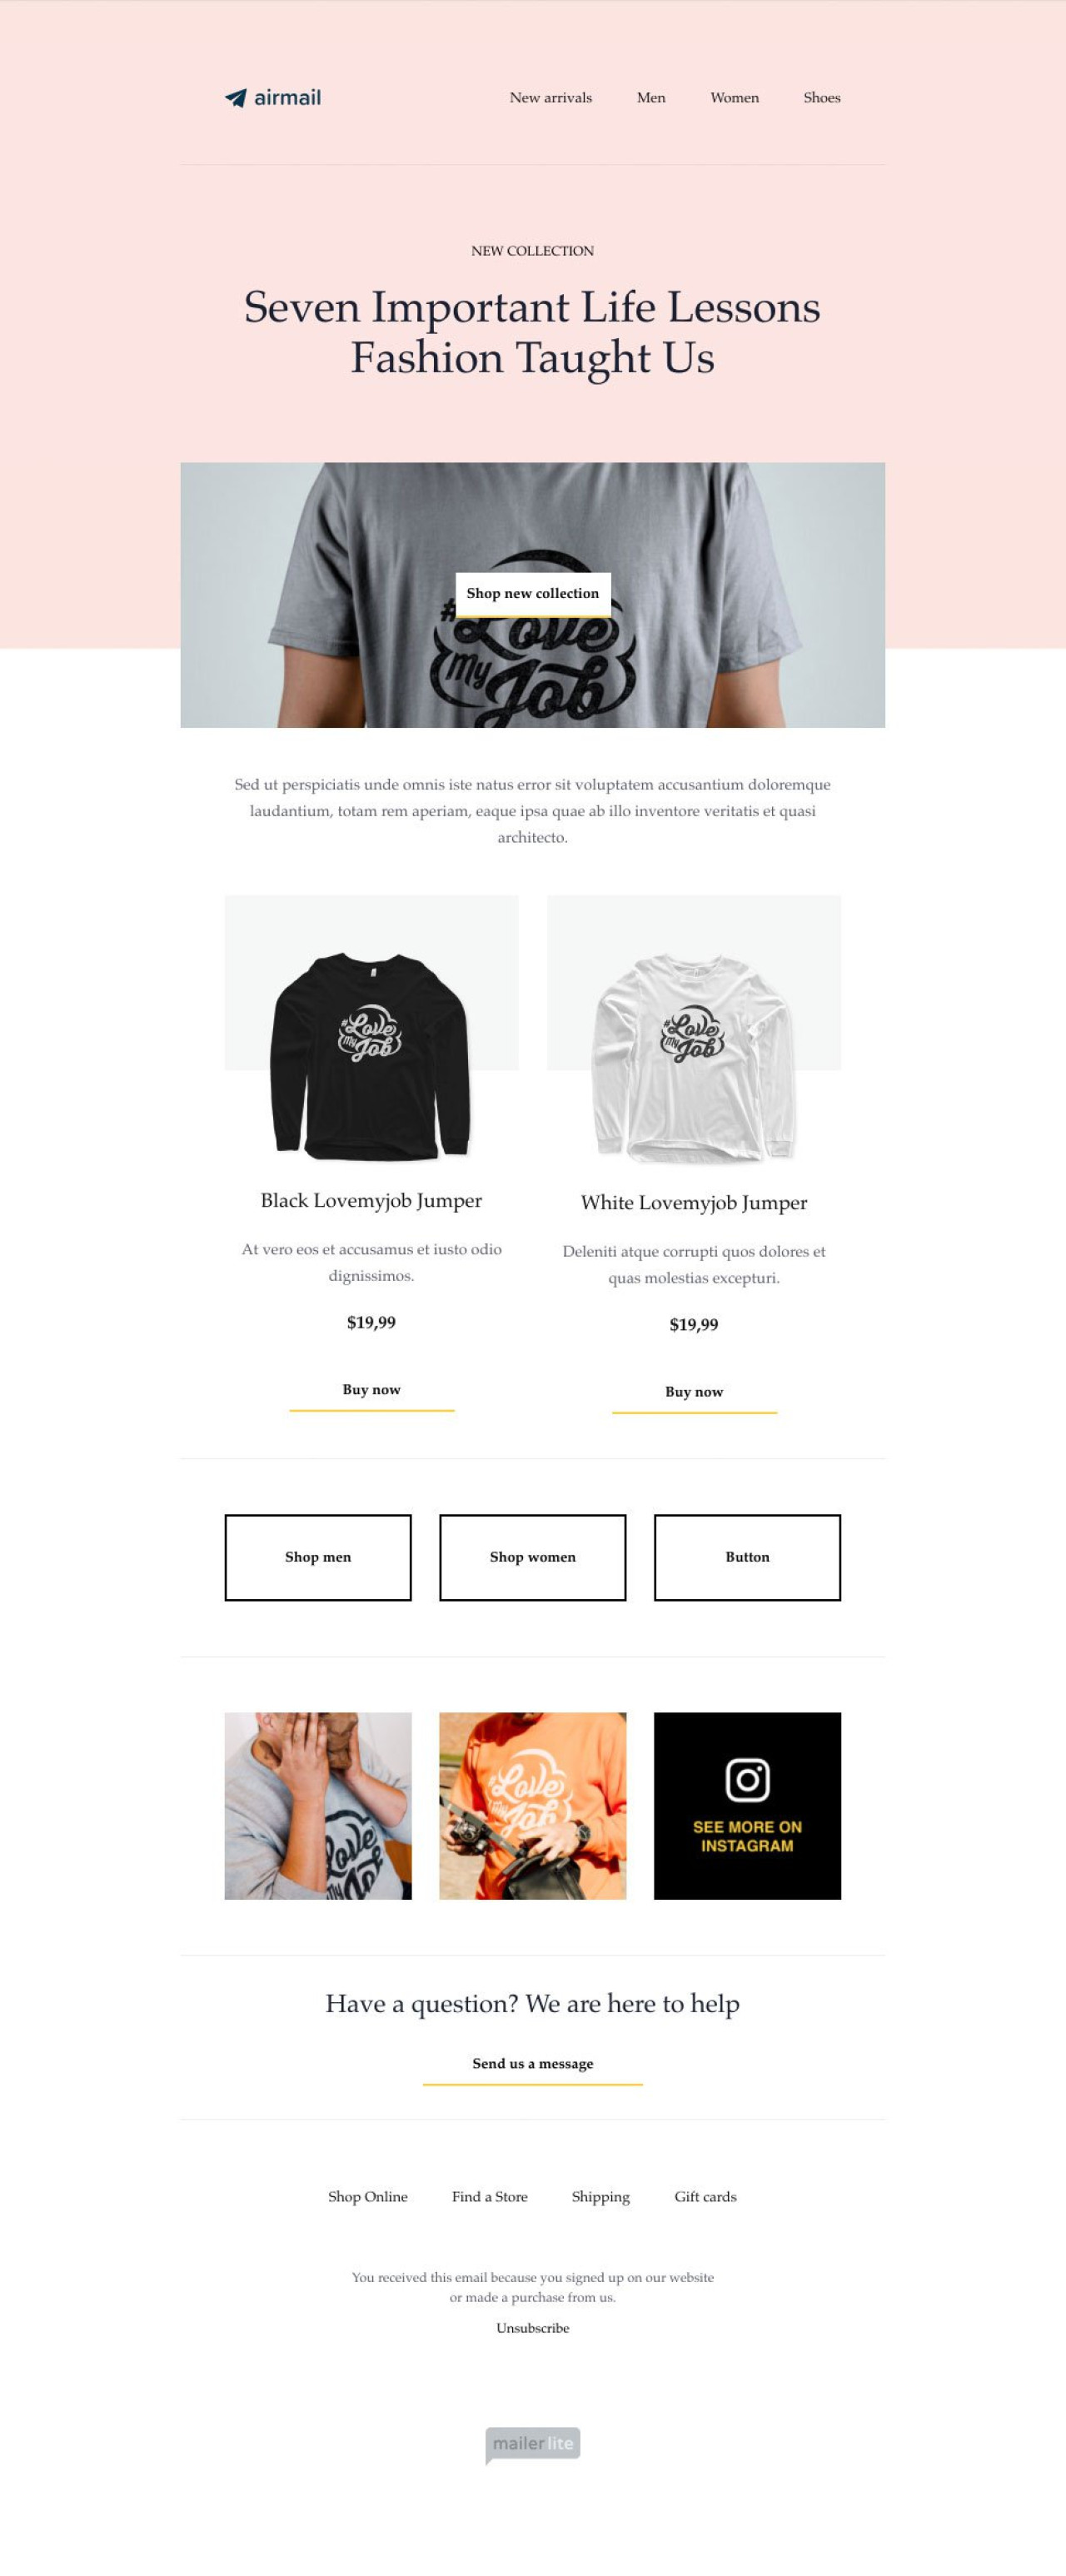 E-commerce #1 example - Made with MailerLite